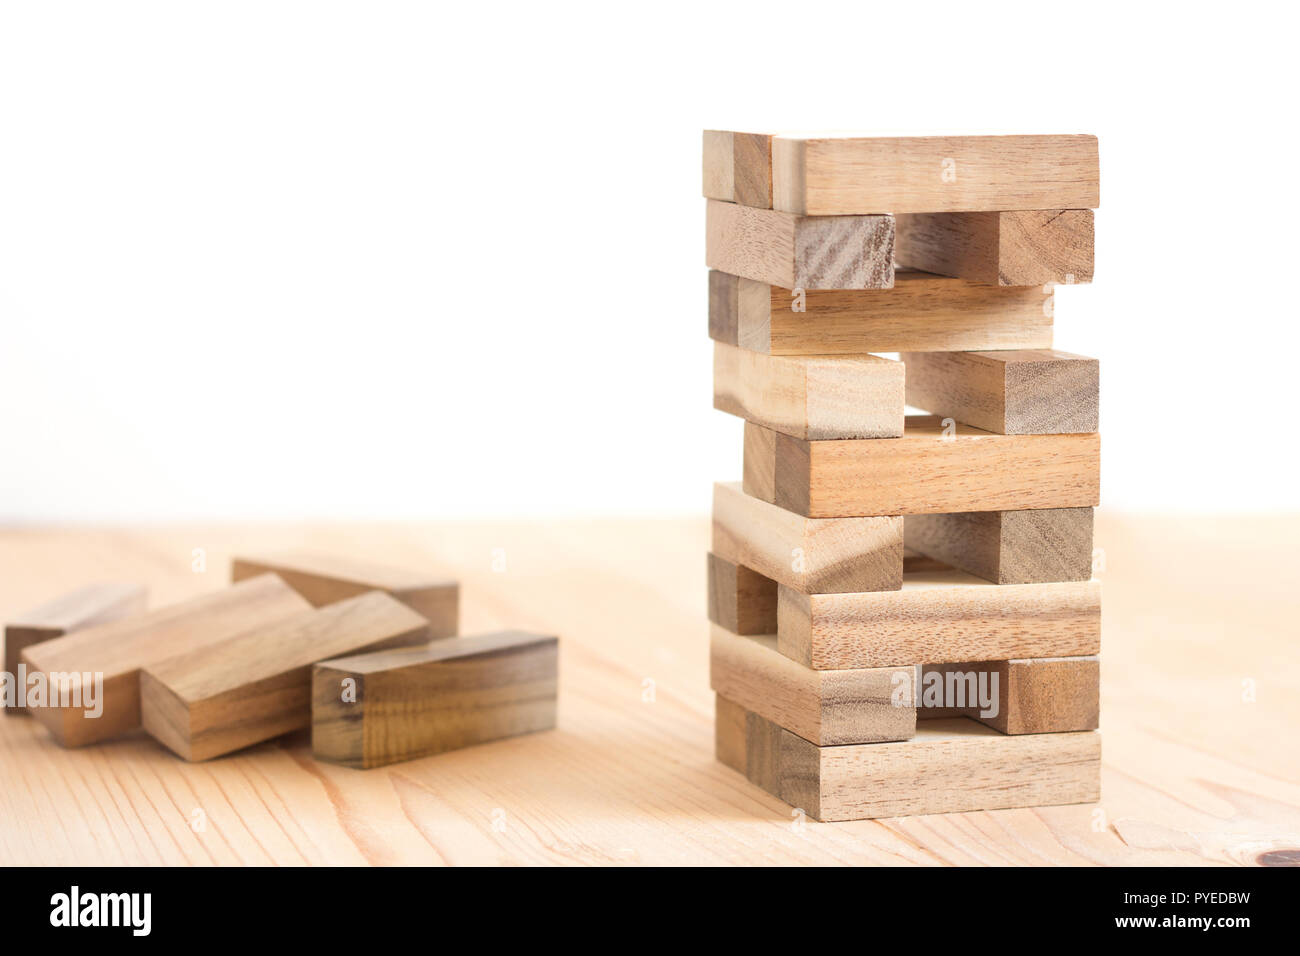 tower made of toy wood blocks Stock Photo